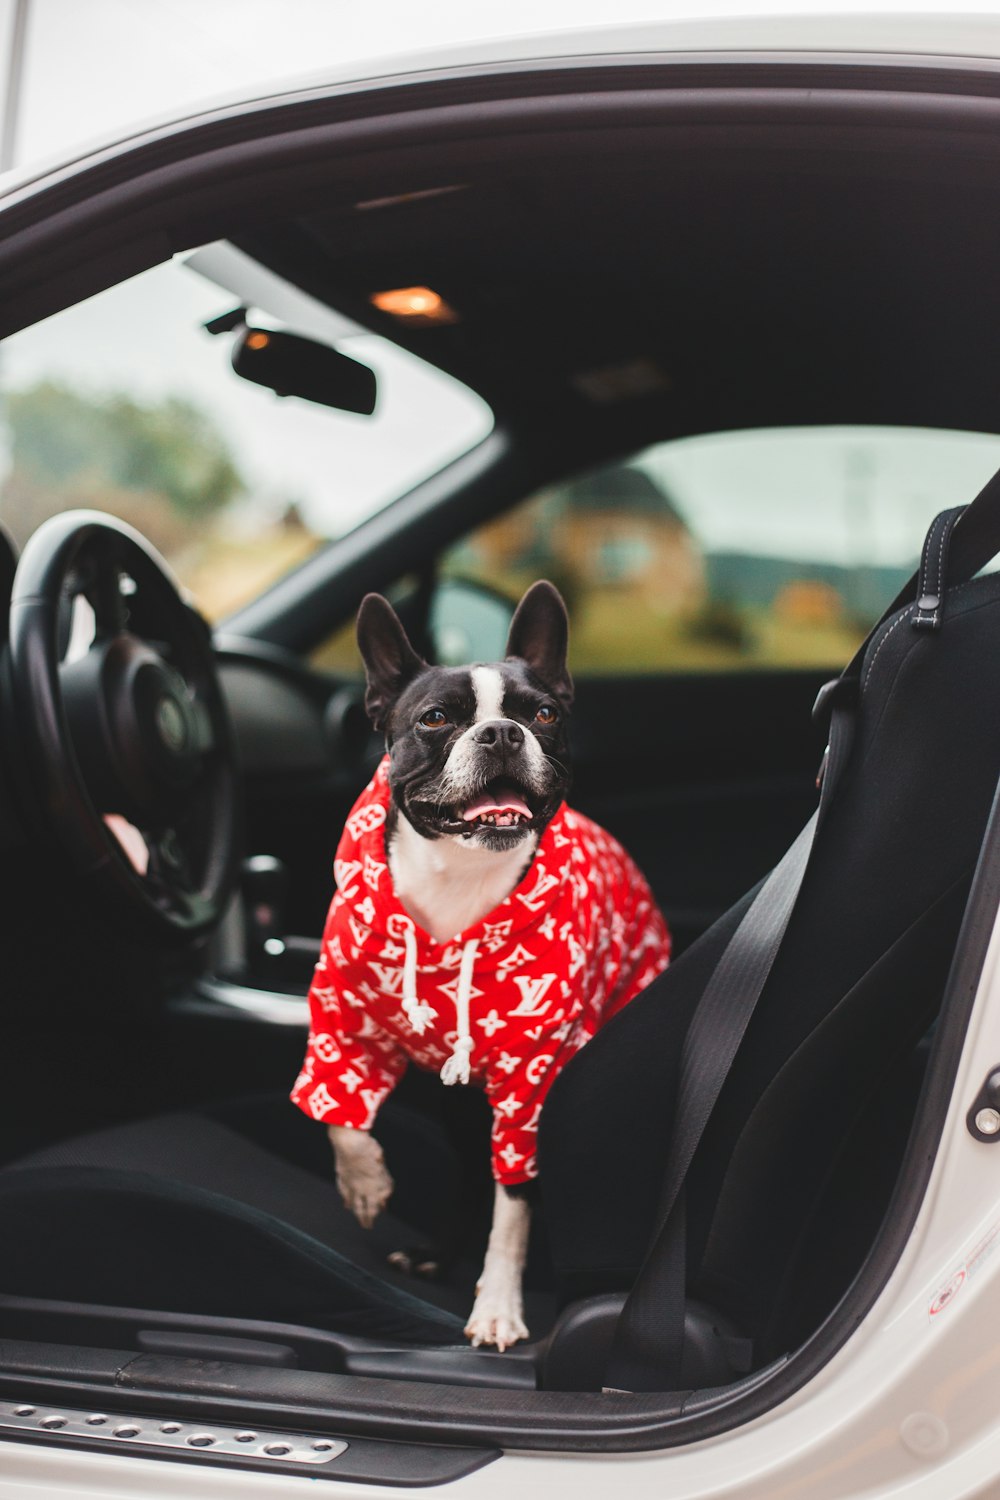 black and white short coated dog in red and black polka dot dress sitting on car